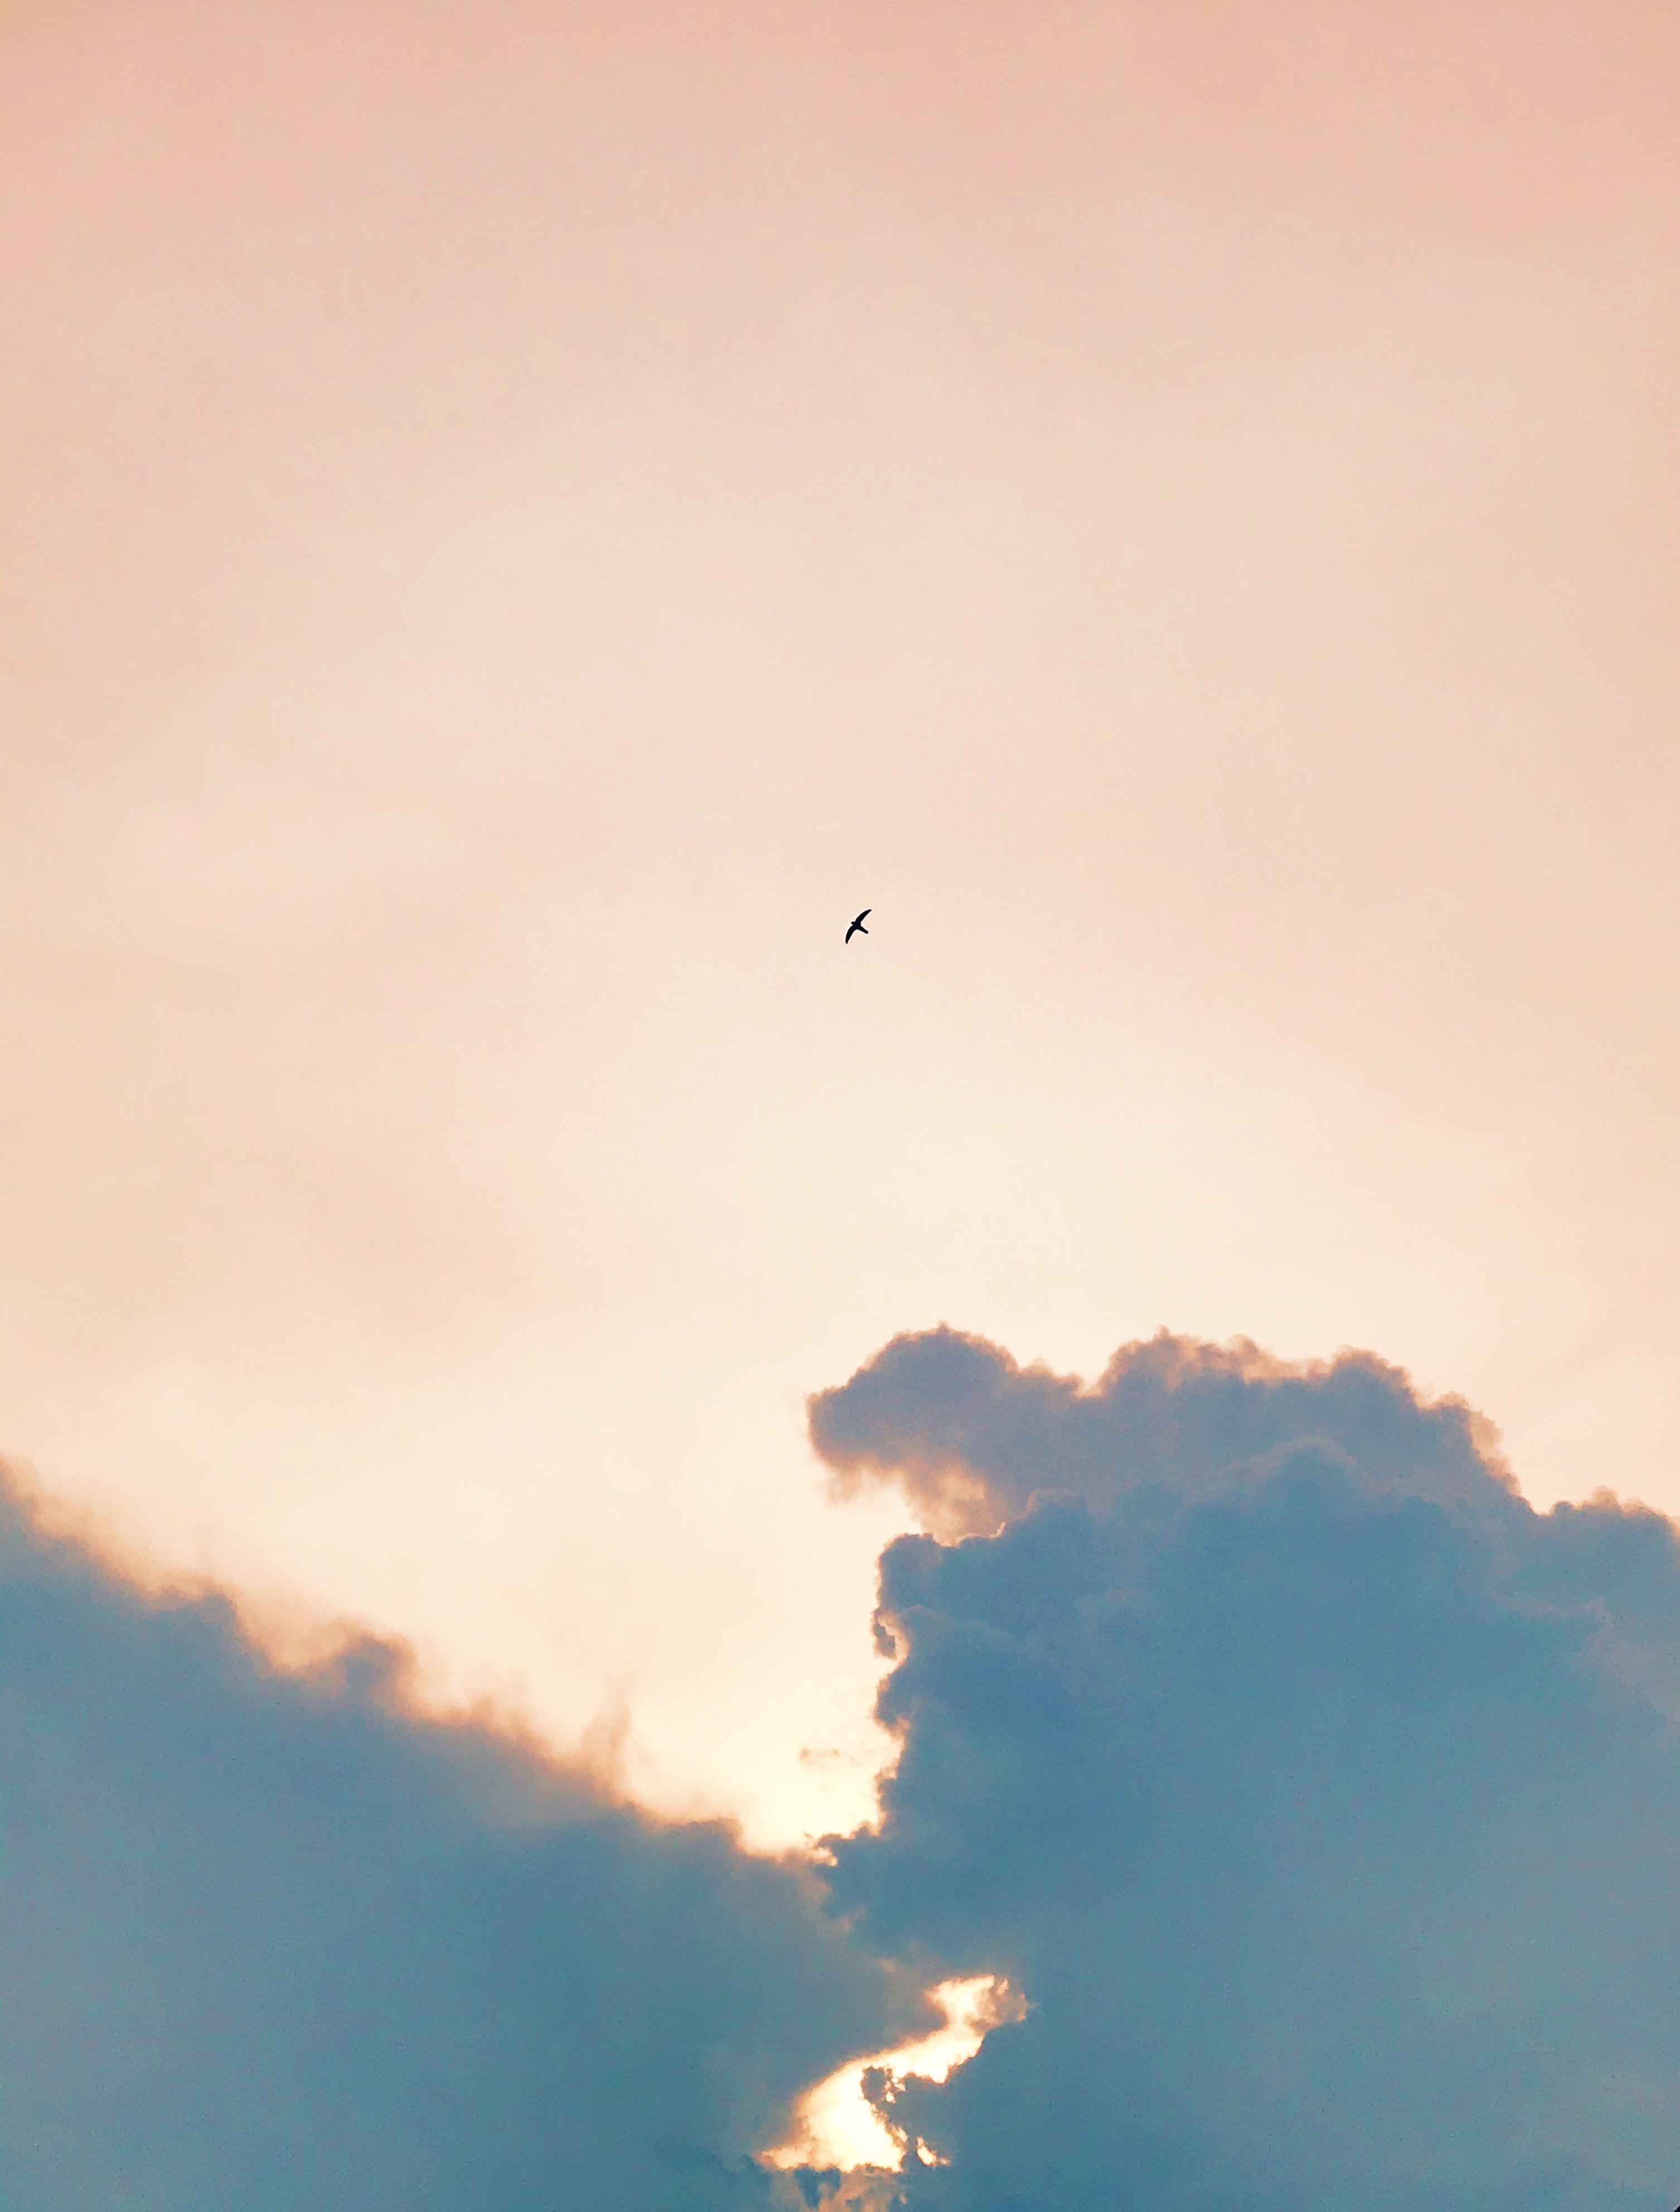 A bird flying in the sky with clouds - Vintage clouds